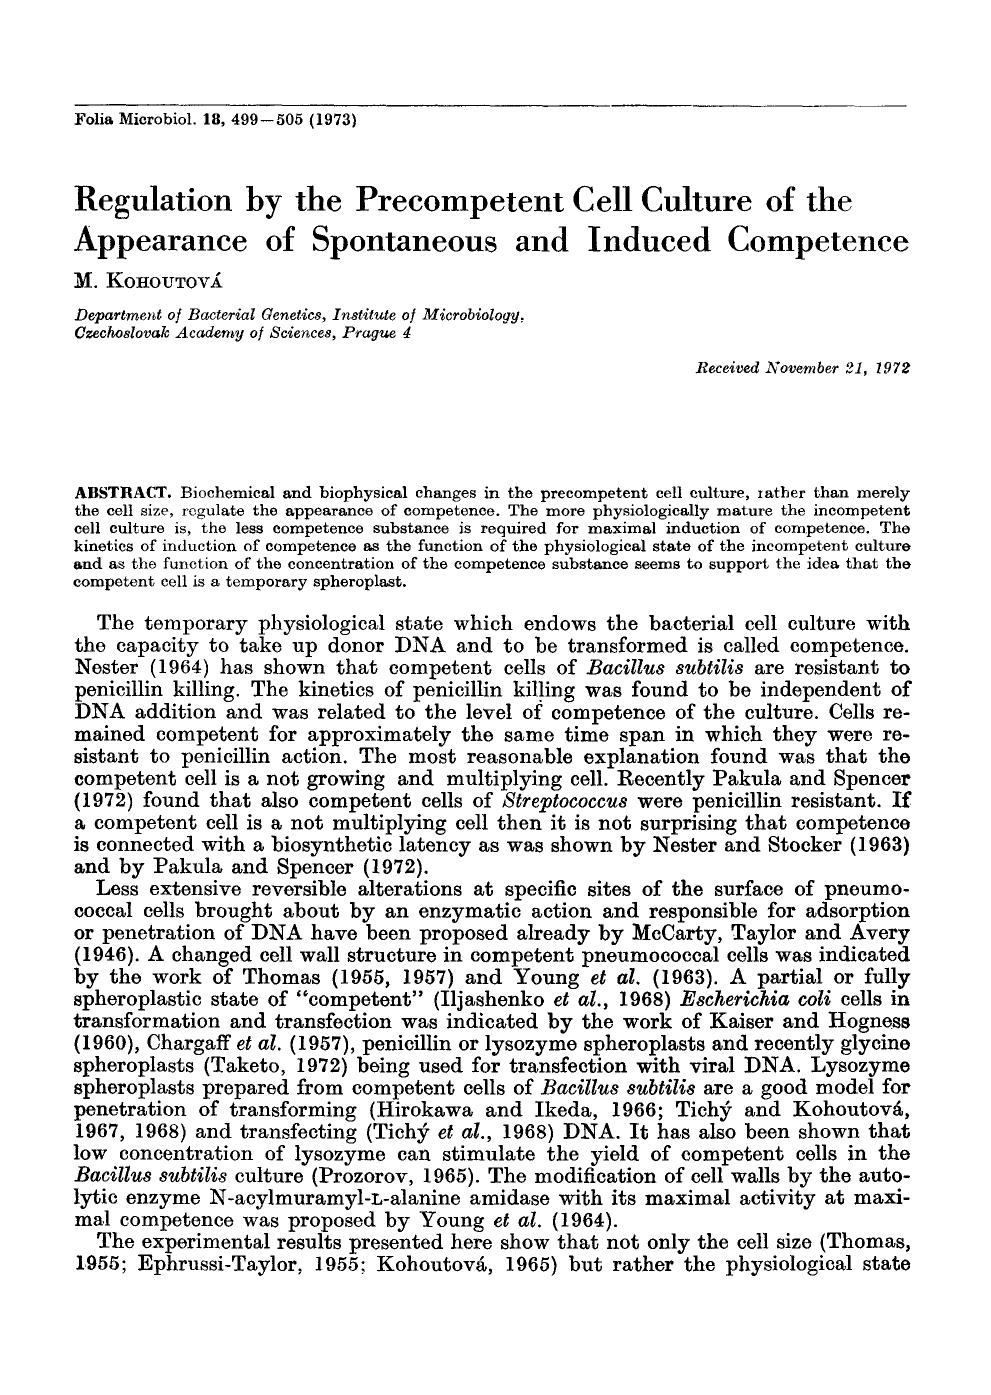 Regulation by the precompetent cell culture of the appearance of spontaneous and induced competence by Unknown